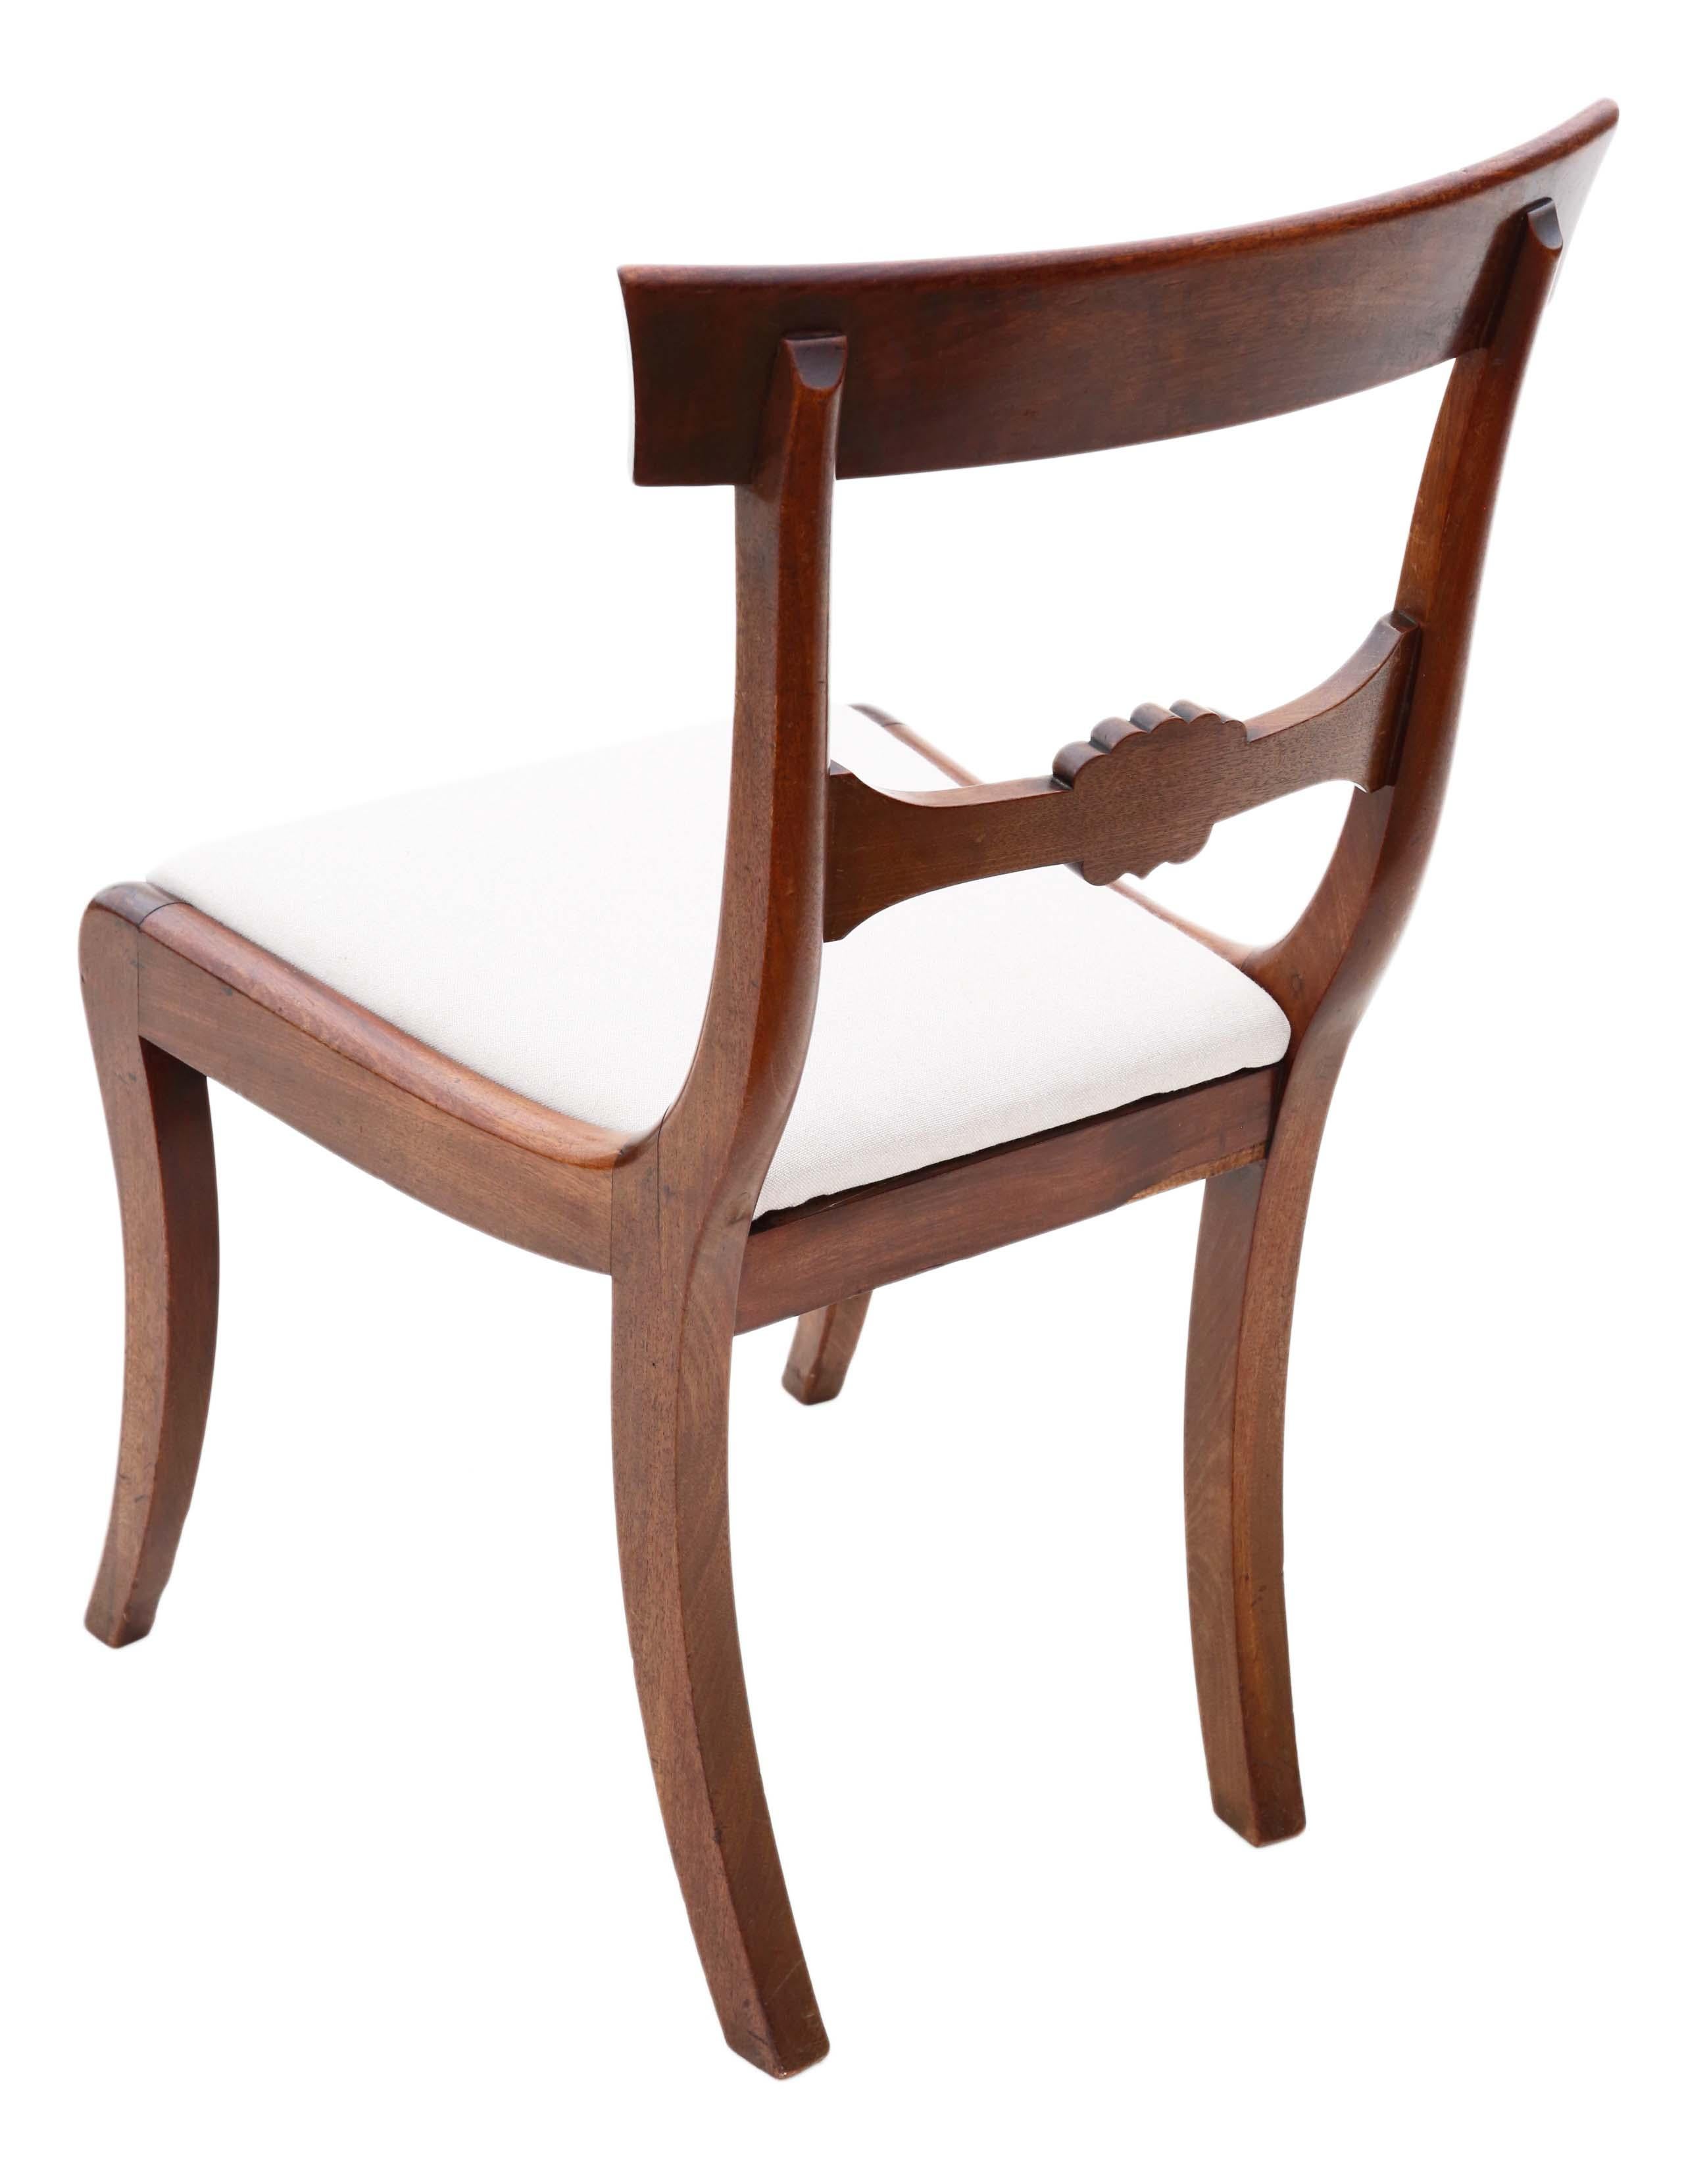 Regency Cuban Mahogany Dining Chairs: Set of 6 (4+2), Antique Quality, C1825 For Sale 8